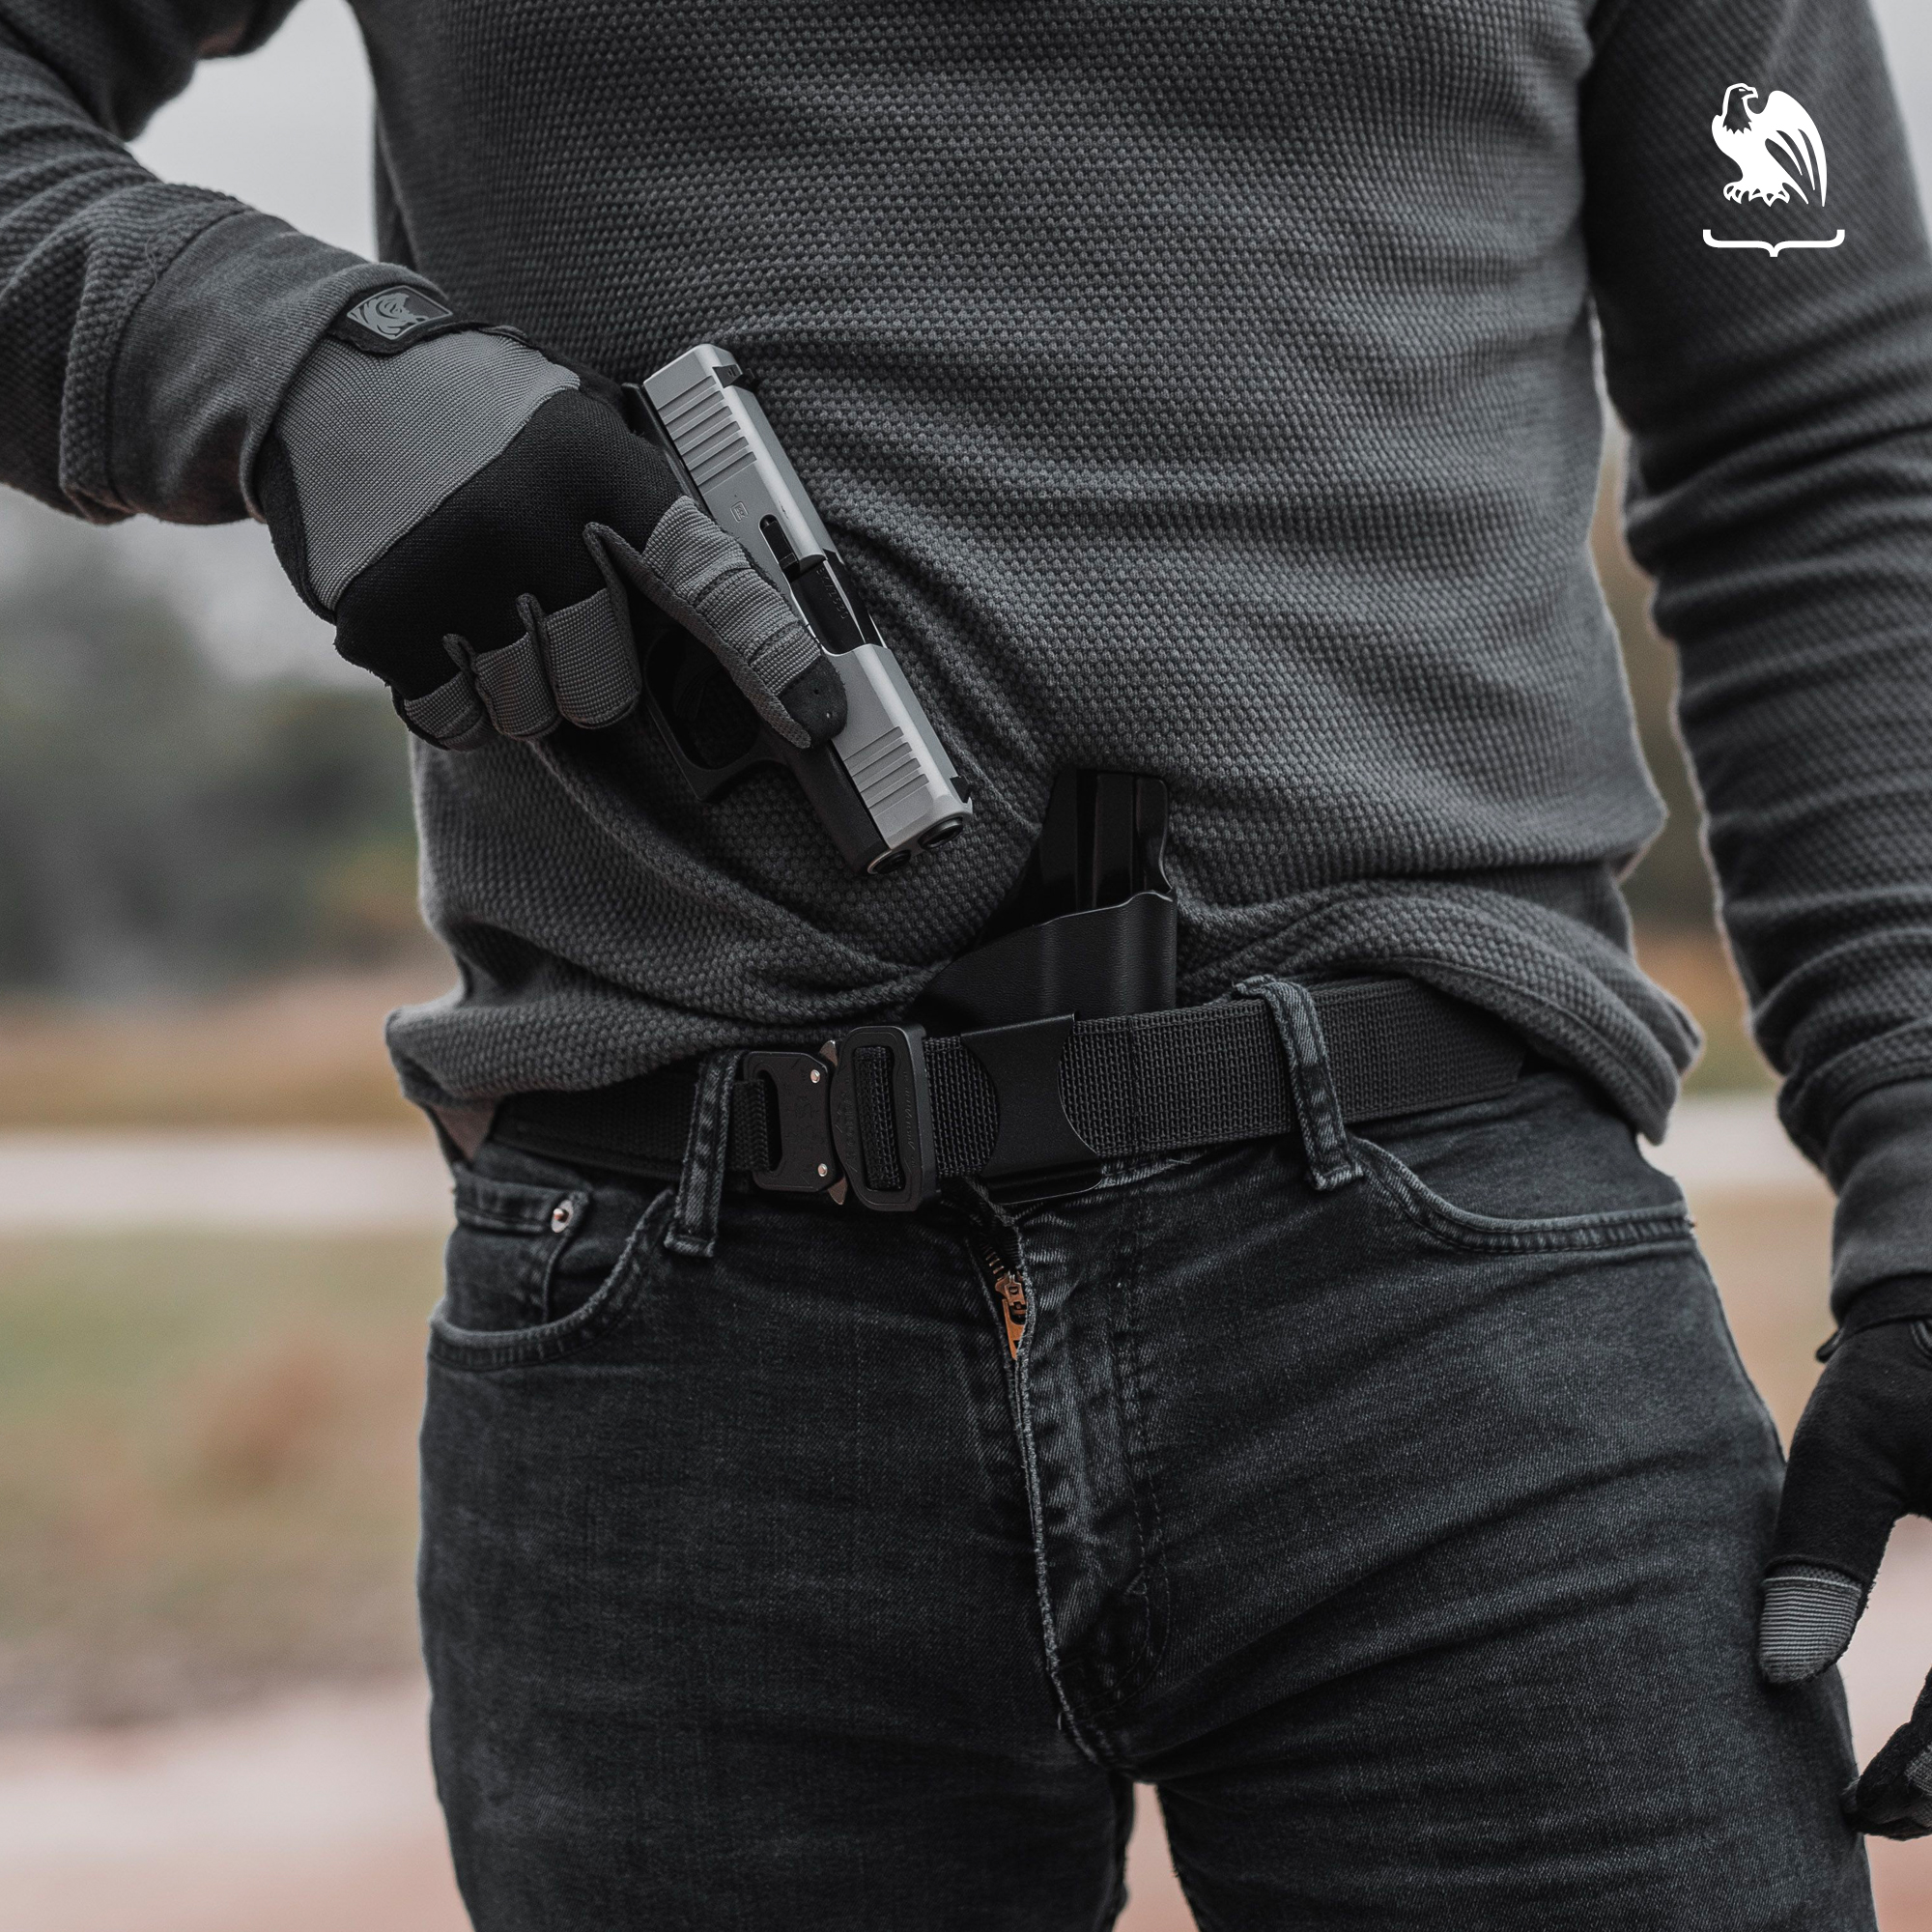 Concealed Carry Glock 43x